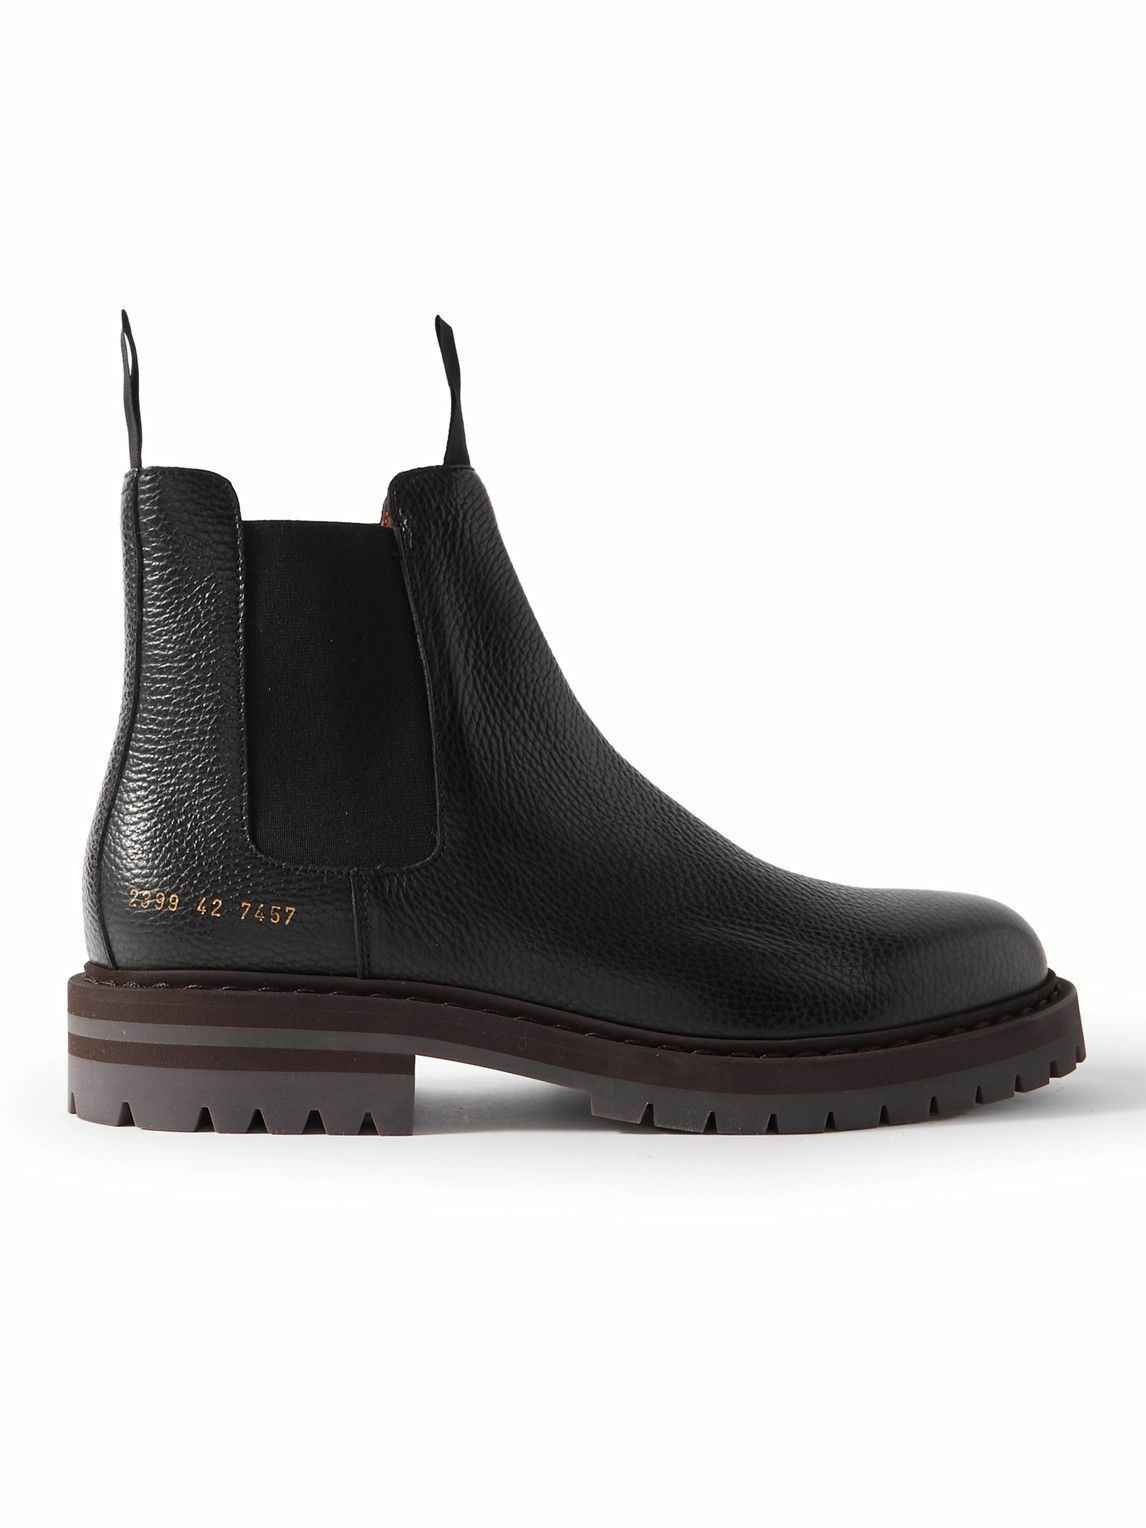 Common Projects - Full-Grain Leather Chelsea Boots - Black Common Projects